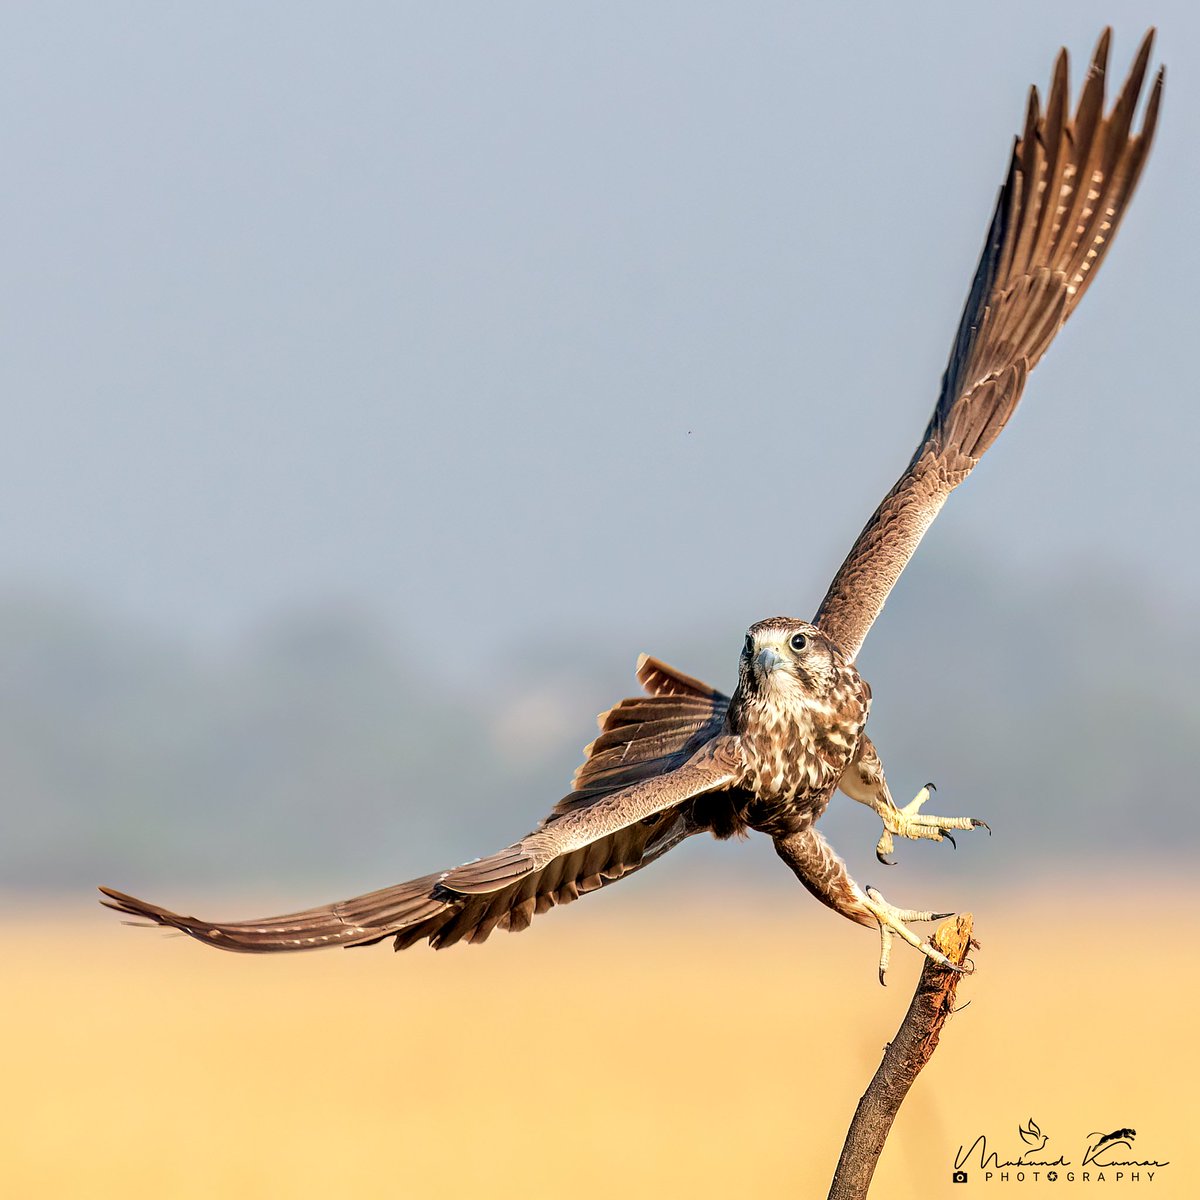 With a powerful leap and a swift flap of its wings, the Laggar Falcon takes flight! 💪 #TakeOffTuesday #LaggarFalcon
Shot at: Tal Chhapar, Churu Rajasthan
#IndiAves #birding #birdwatching #photography